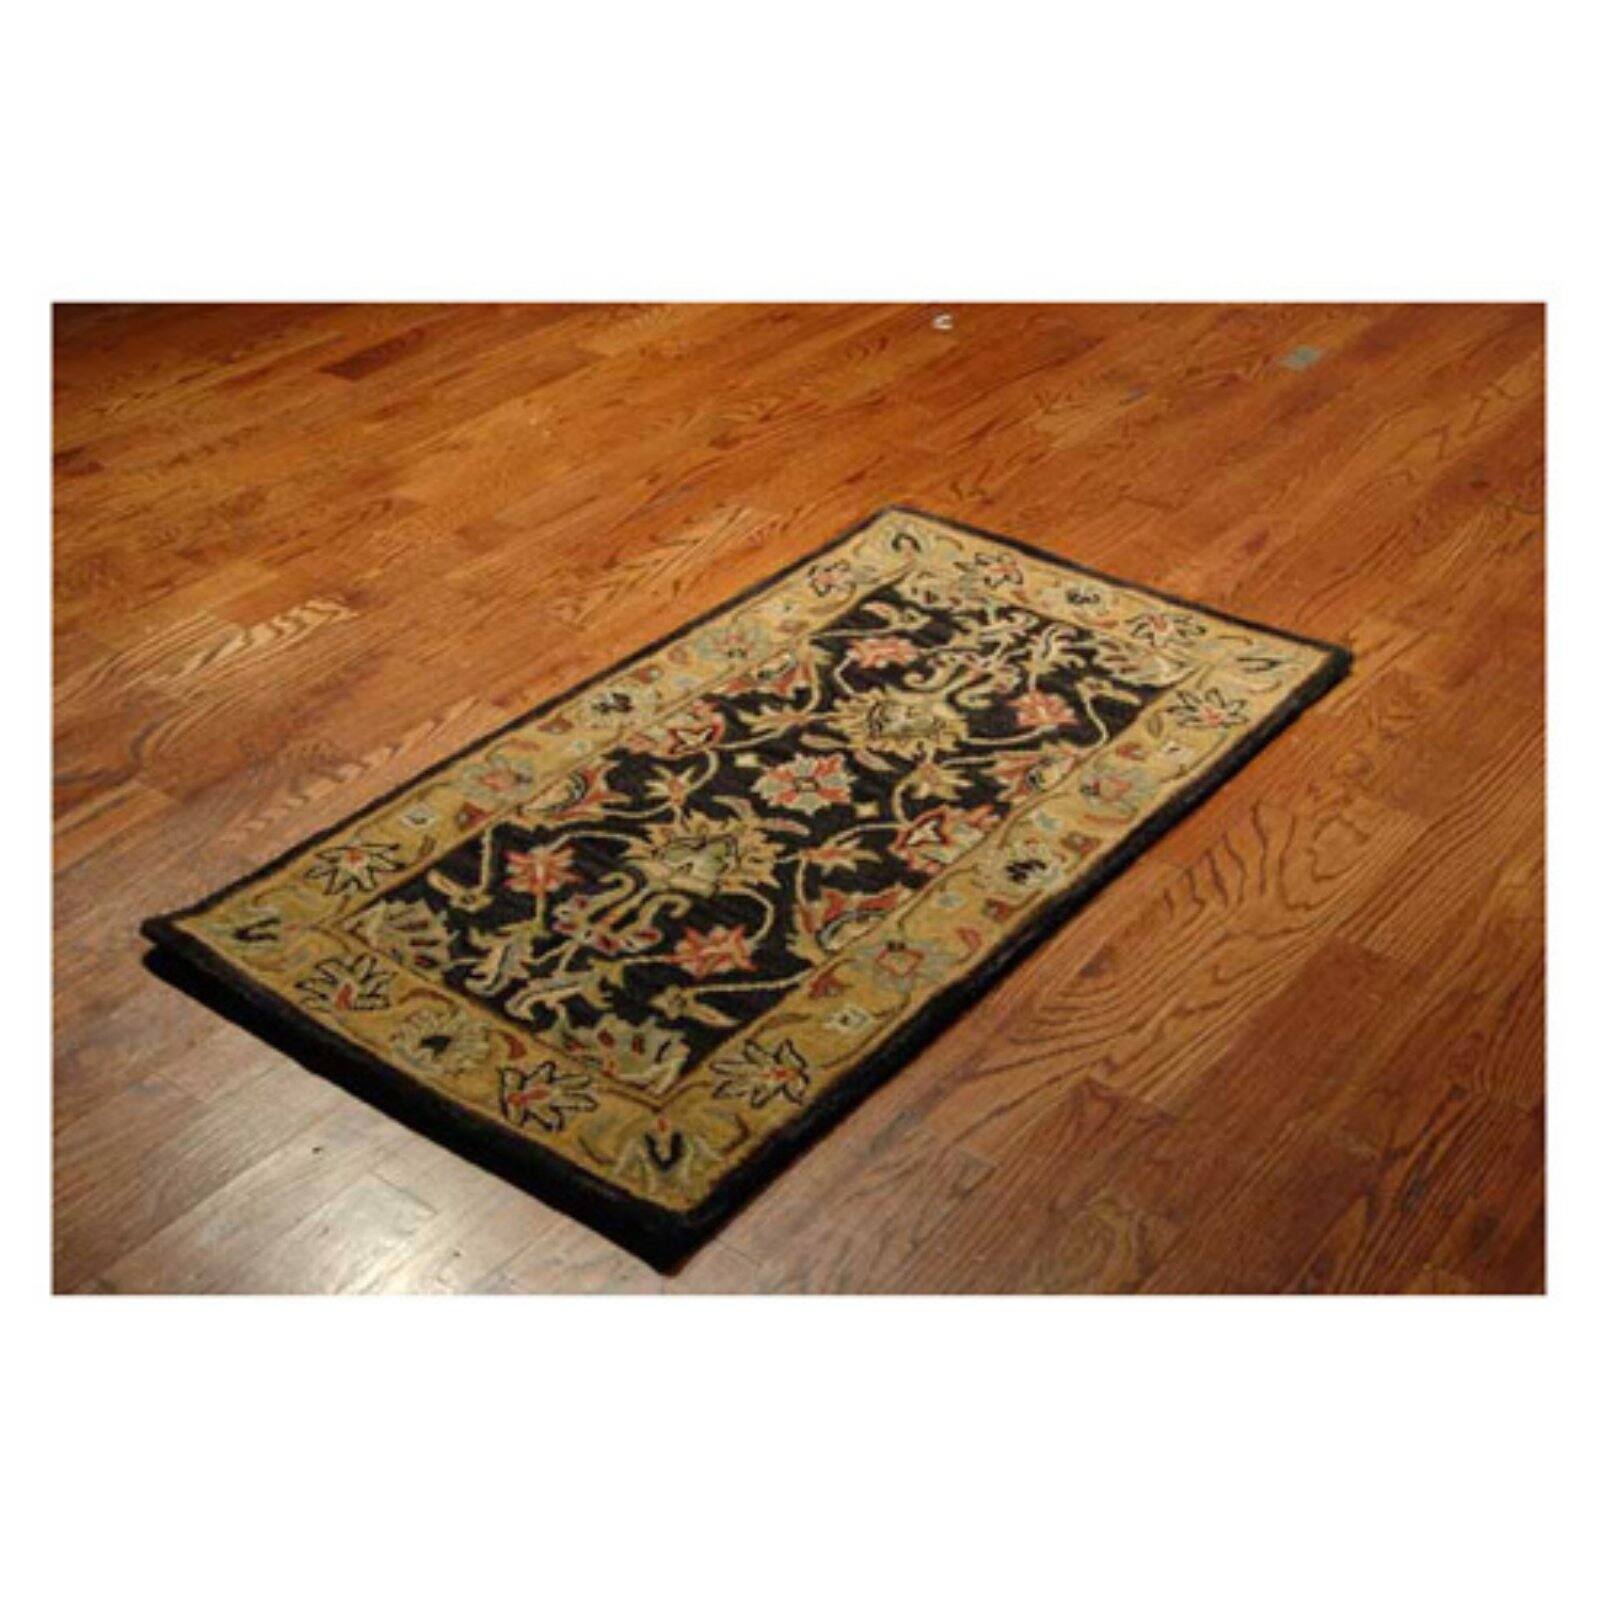 SAFAVIEH Heritage Regis Traditional Wool Area Rug, Charcoal/Gold, 4' x 6' - image 2 of 10